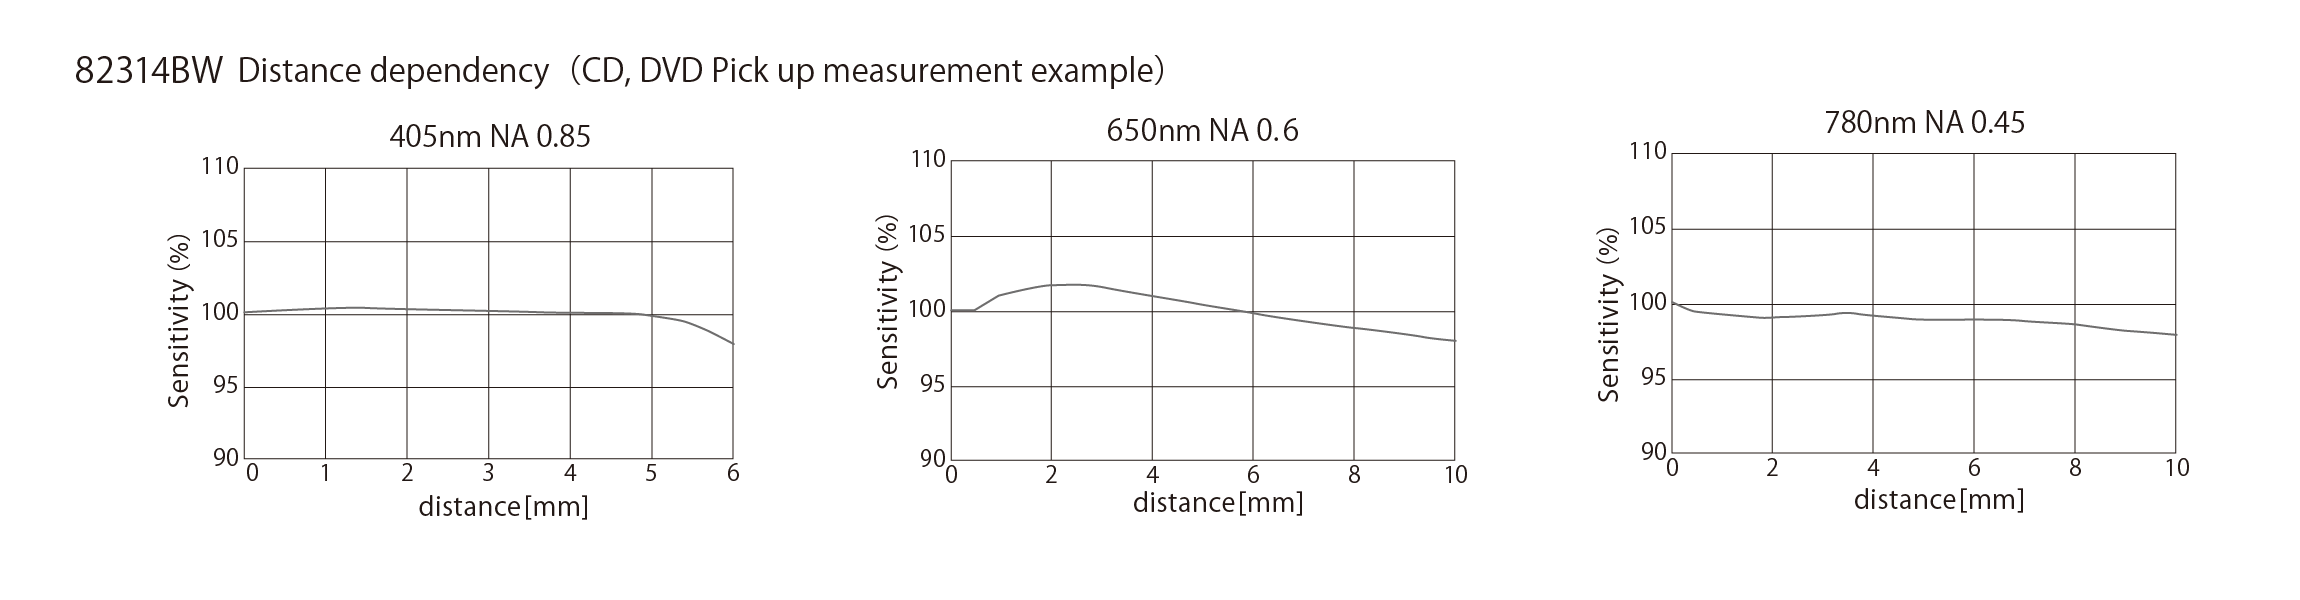 82314BW Distance dependency（CD, DVD Pick up measurement example）